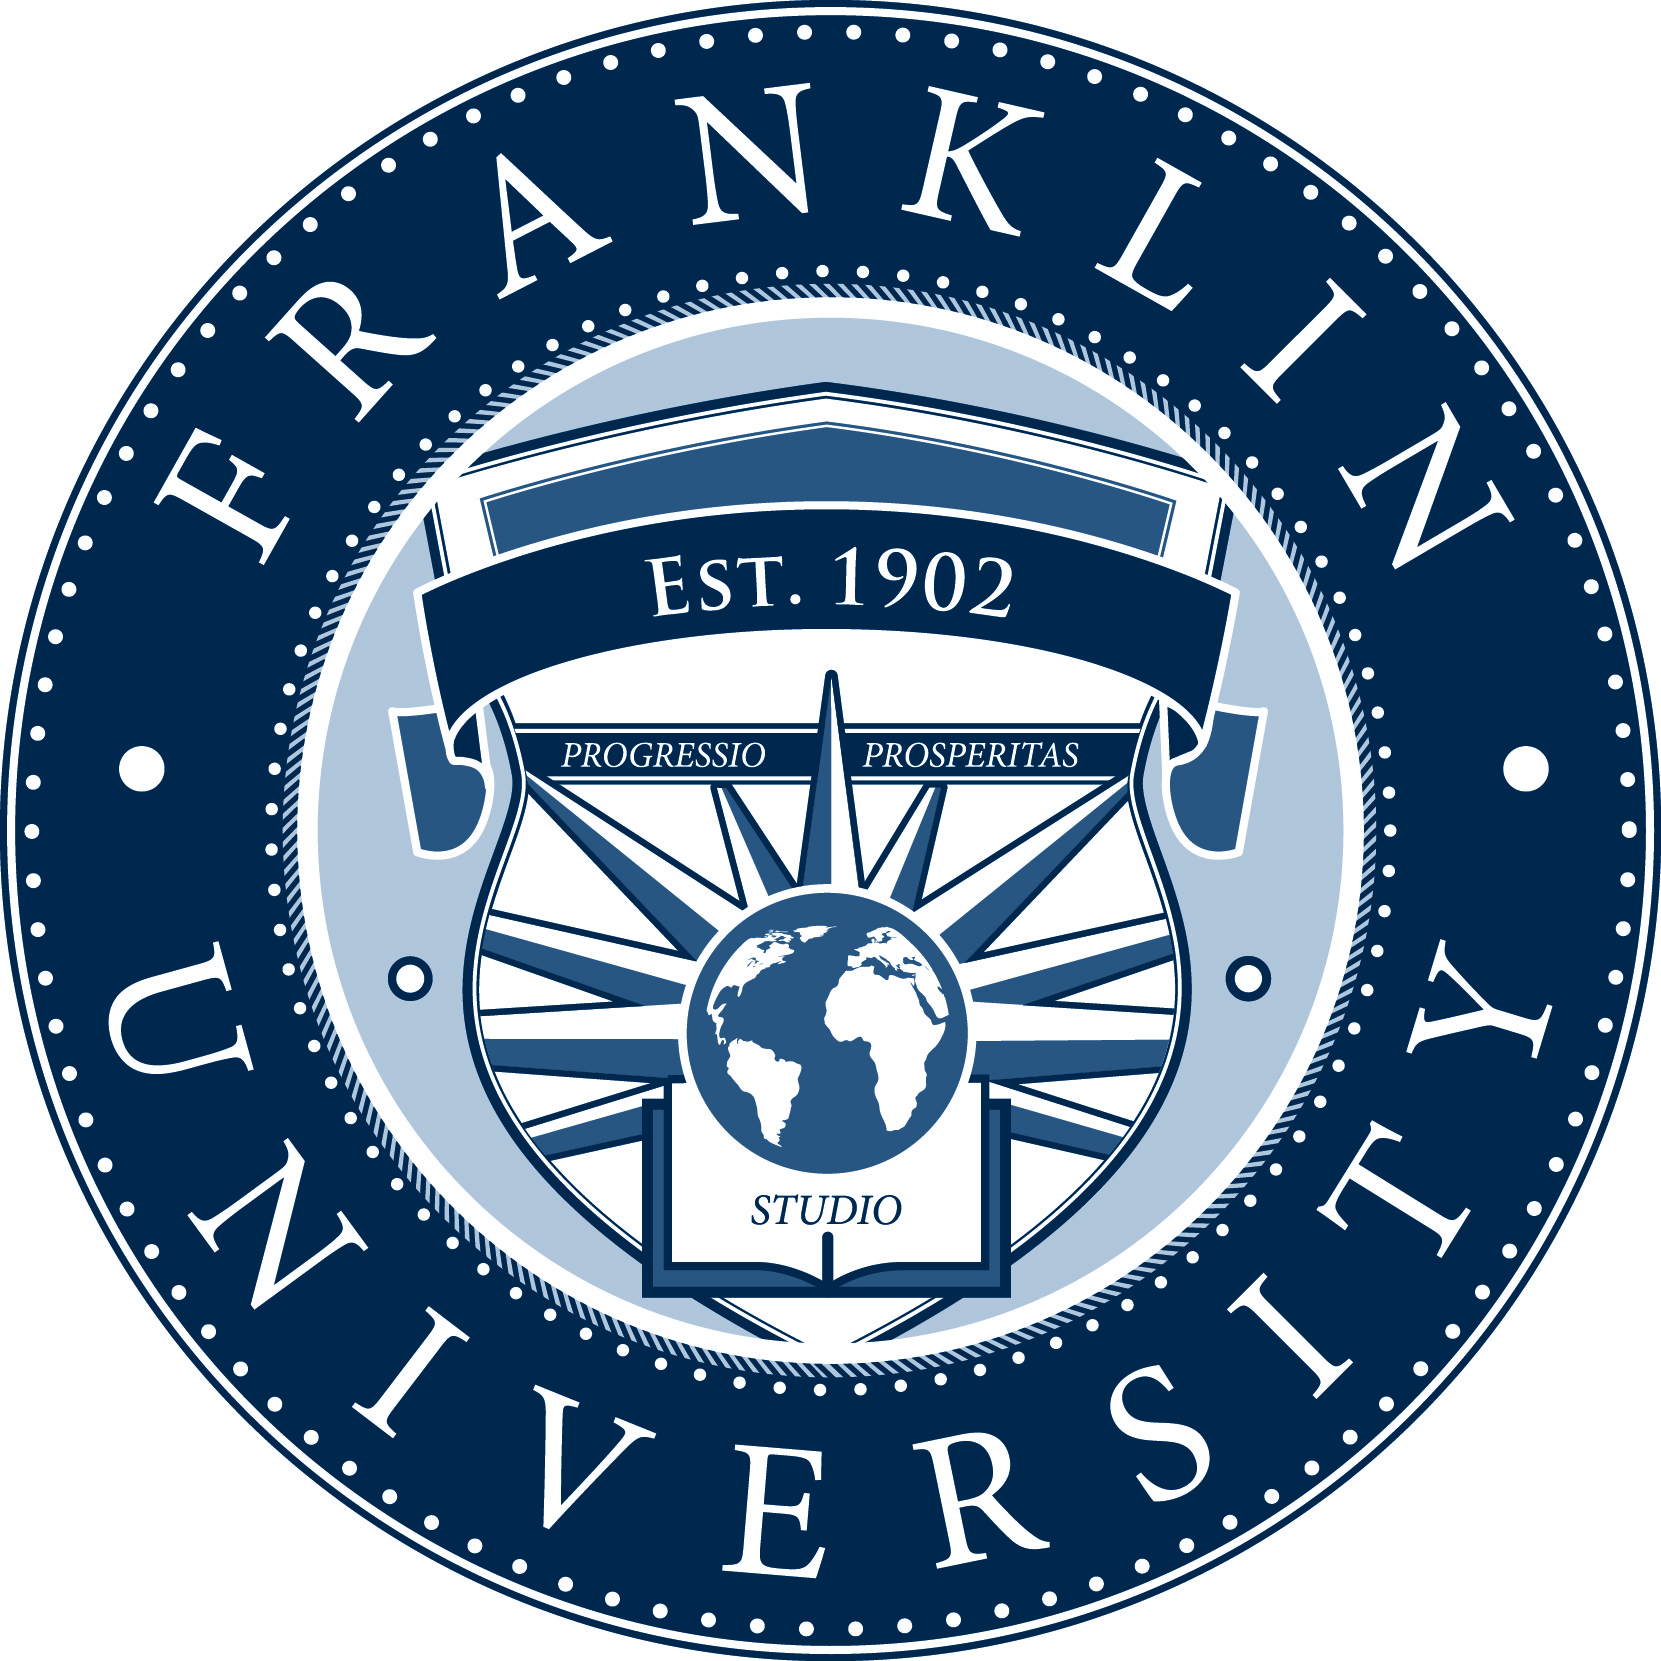 Franklin University to Host 143rd Commencement Ceremony